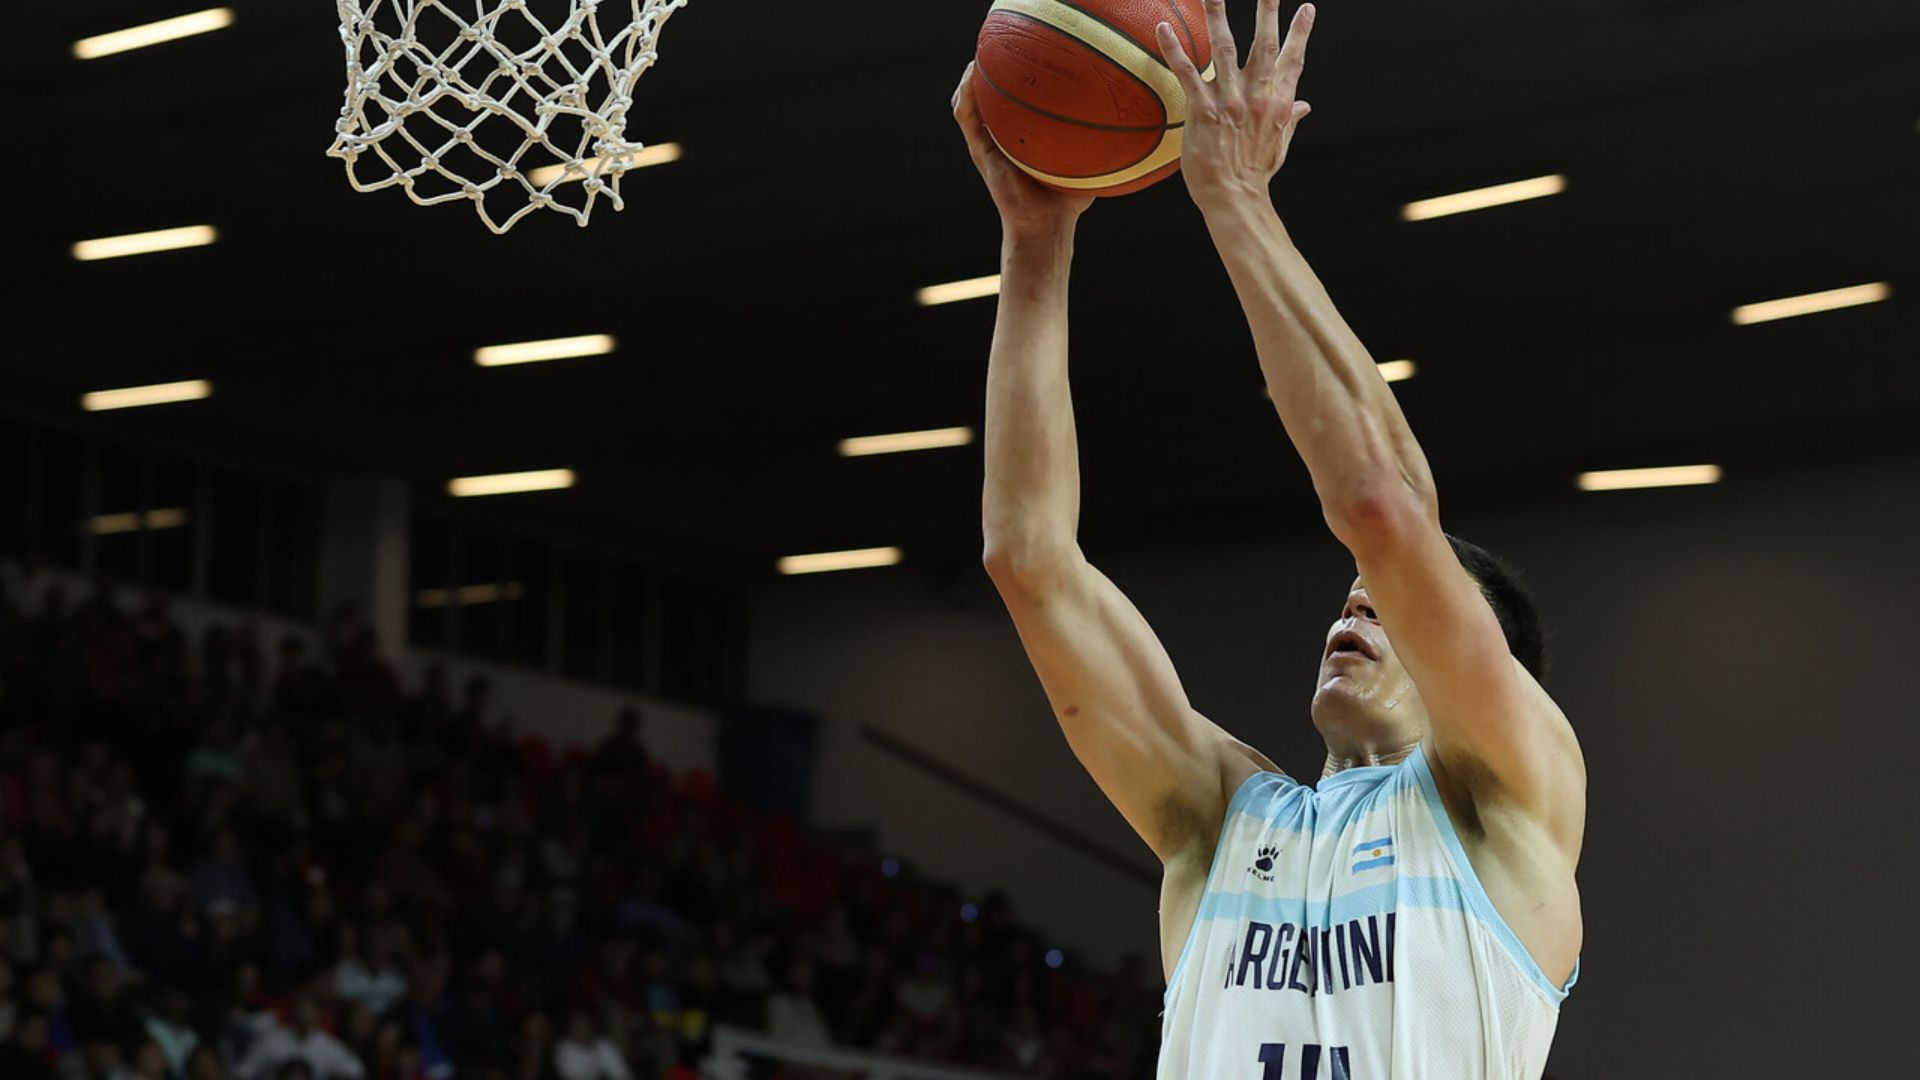 Argentina Defeats Venezuela and is Now Two-Time Pan American Champion